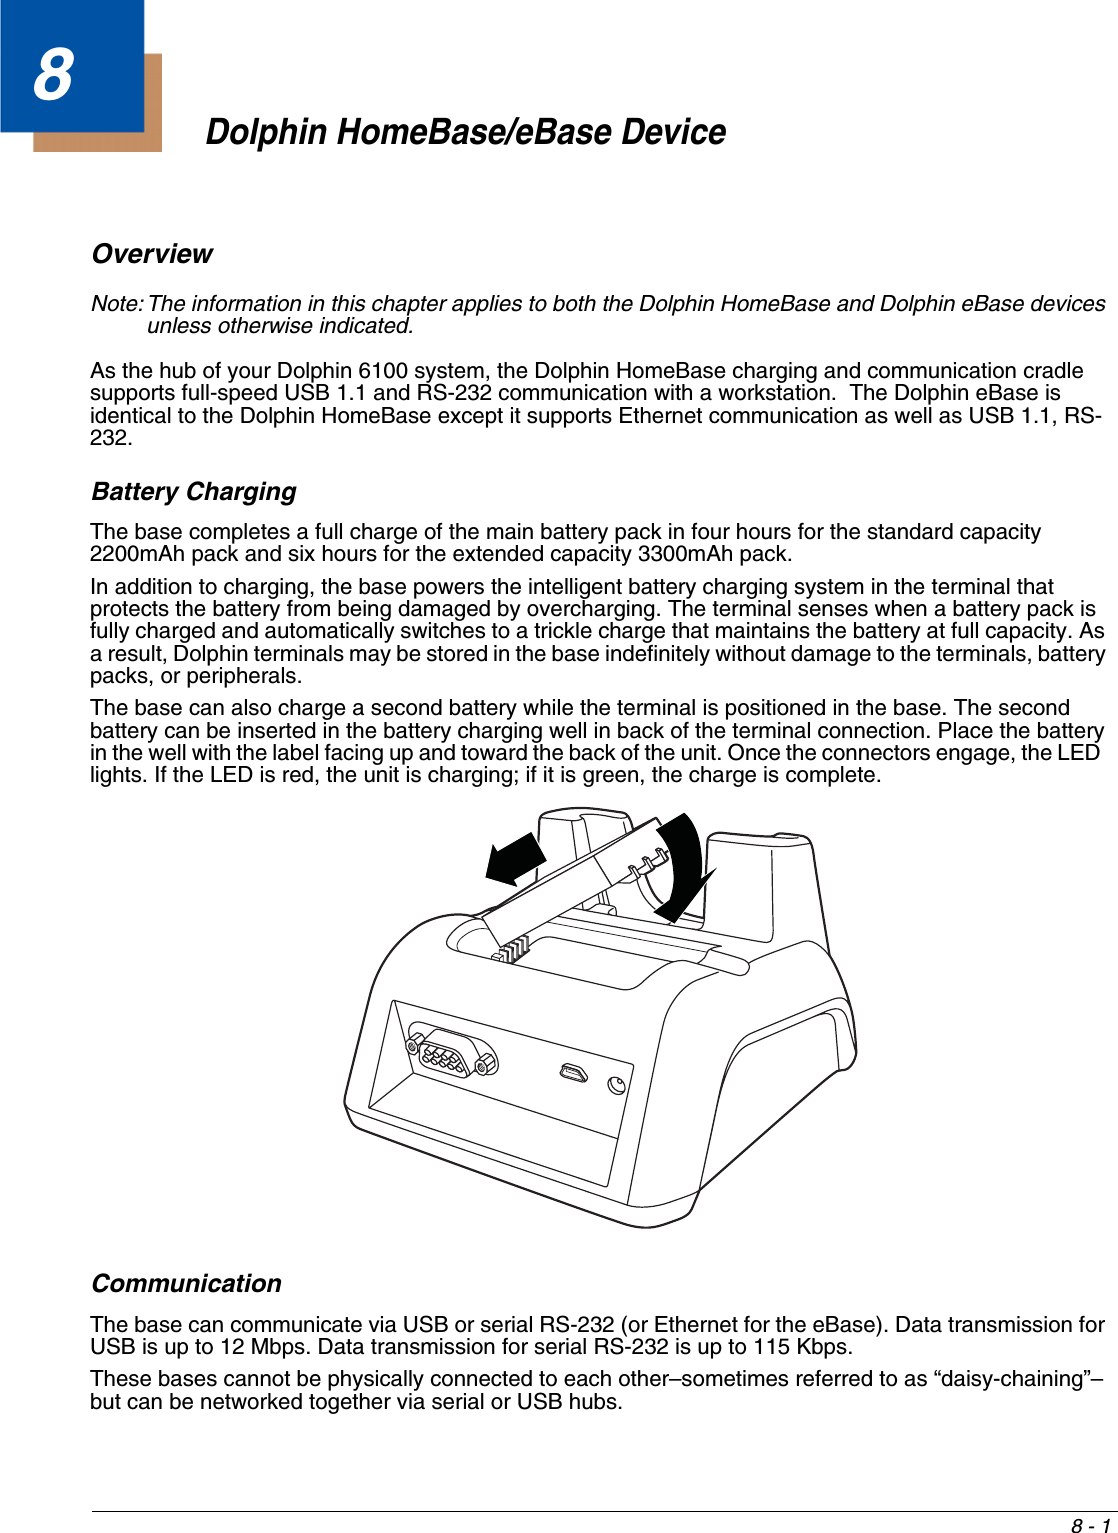 8 - 18Dolphin HomeBase/eBase DeviceOverviewNote: The information in this chapter applies to both the Dolphin HomeBase and Dolphin eBase devices unless otherwise indicated.As the hub of your Dolphin 6100 system, the Dolphin HomeBase charging and communication cradle supports full-speed USB 1.1 and RS-232 communication with a workstation.  The Dolphin eBase is identical to the Dolphin HomeBase except it supports Ethernet communication as well as USB 1.1, RS-232.Battery ChargingThe base completes a full charge of the main battery pack in four hours for the standard capacity 2200mAh pack and six hours for the extended capacity 3300mAh pack. In addition to charging, the base powers the intelligent battery charging system in the terminal that protects the battery from being damaged by overcharging. The terminal senses when a battery pack is fully charged and automatically switches to a trickle charge that maintains the battery at full capacity. As a result, Dolphin terminals may be stored in the base indefinitely without damage to the terminals, battery packs, or peripherals. The base can also charge a second battery while the terminal is positioned in the base. The second battery can be inserted in the battery charging well in back of the terminal connection. Place the battery in the well with the label facing up and toward the back of the unit. Once the connectors engage, the LED  lights. If the LED is red, the unit is charging; if it is green, the charge is complete.CommunicationThe base can communicate via USB or serial RS-232 (or Ethernet for the eBase). Data transmission for USB is up to 12 Mbps. Data transmission for serial RS-232 is up to 115 Kbps. These bases cannot be physically connected to each other–sometimes referred to as “daisy-chaining”–but can be networked together via serial or USB hubs.